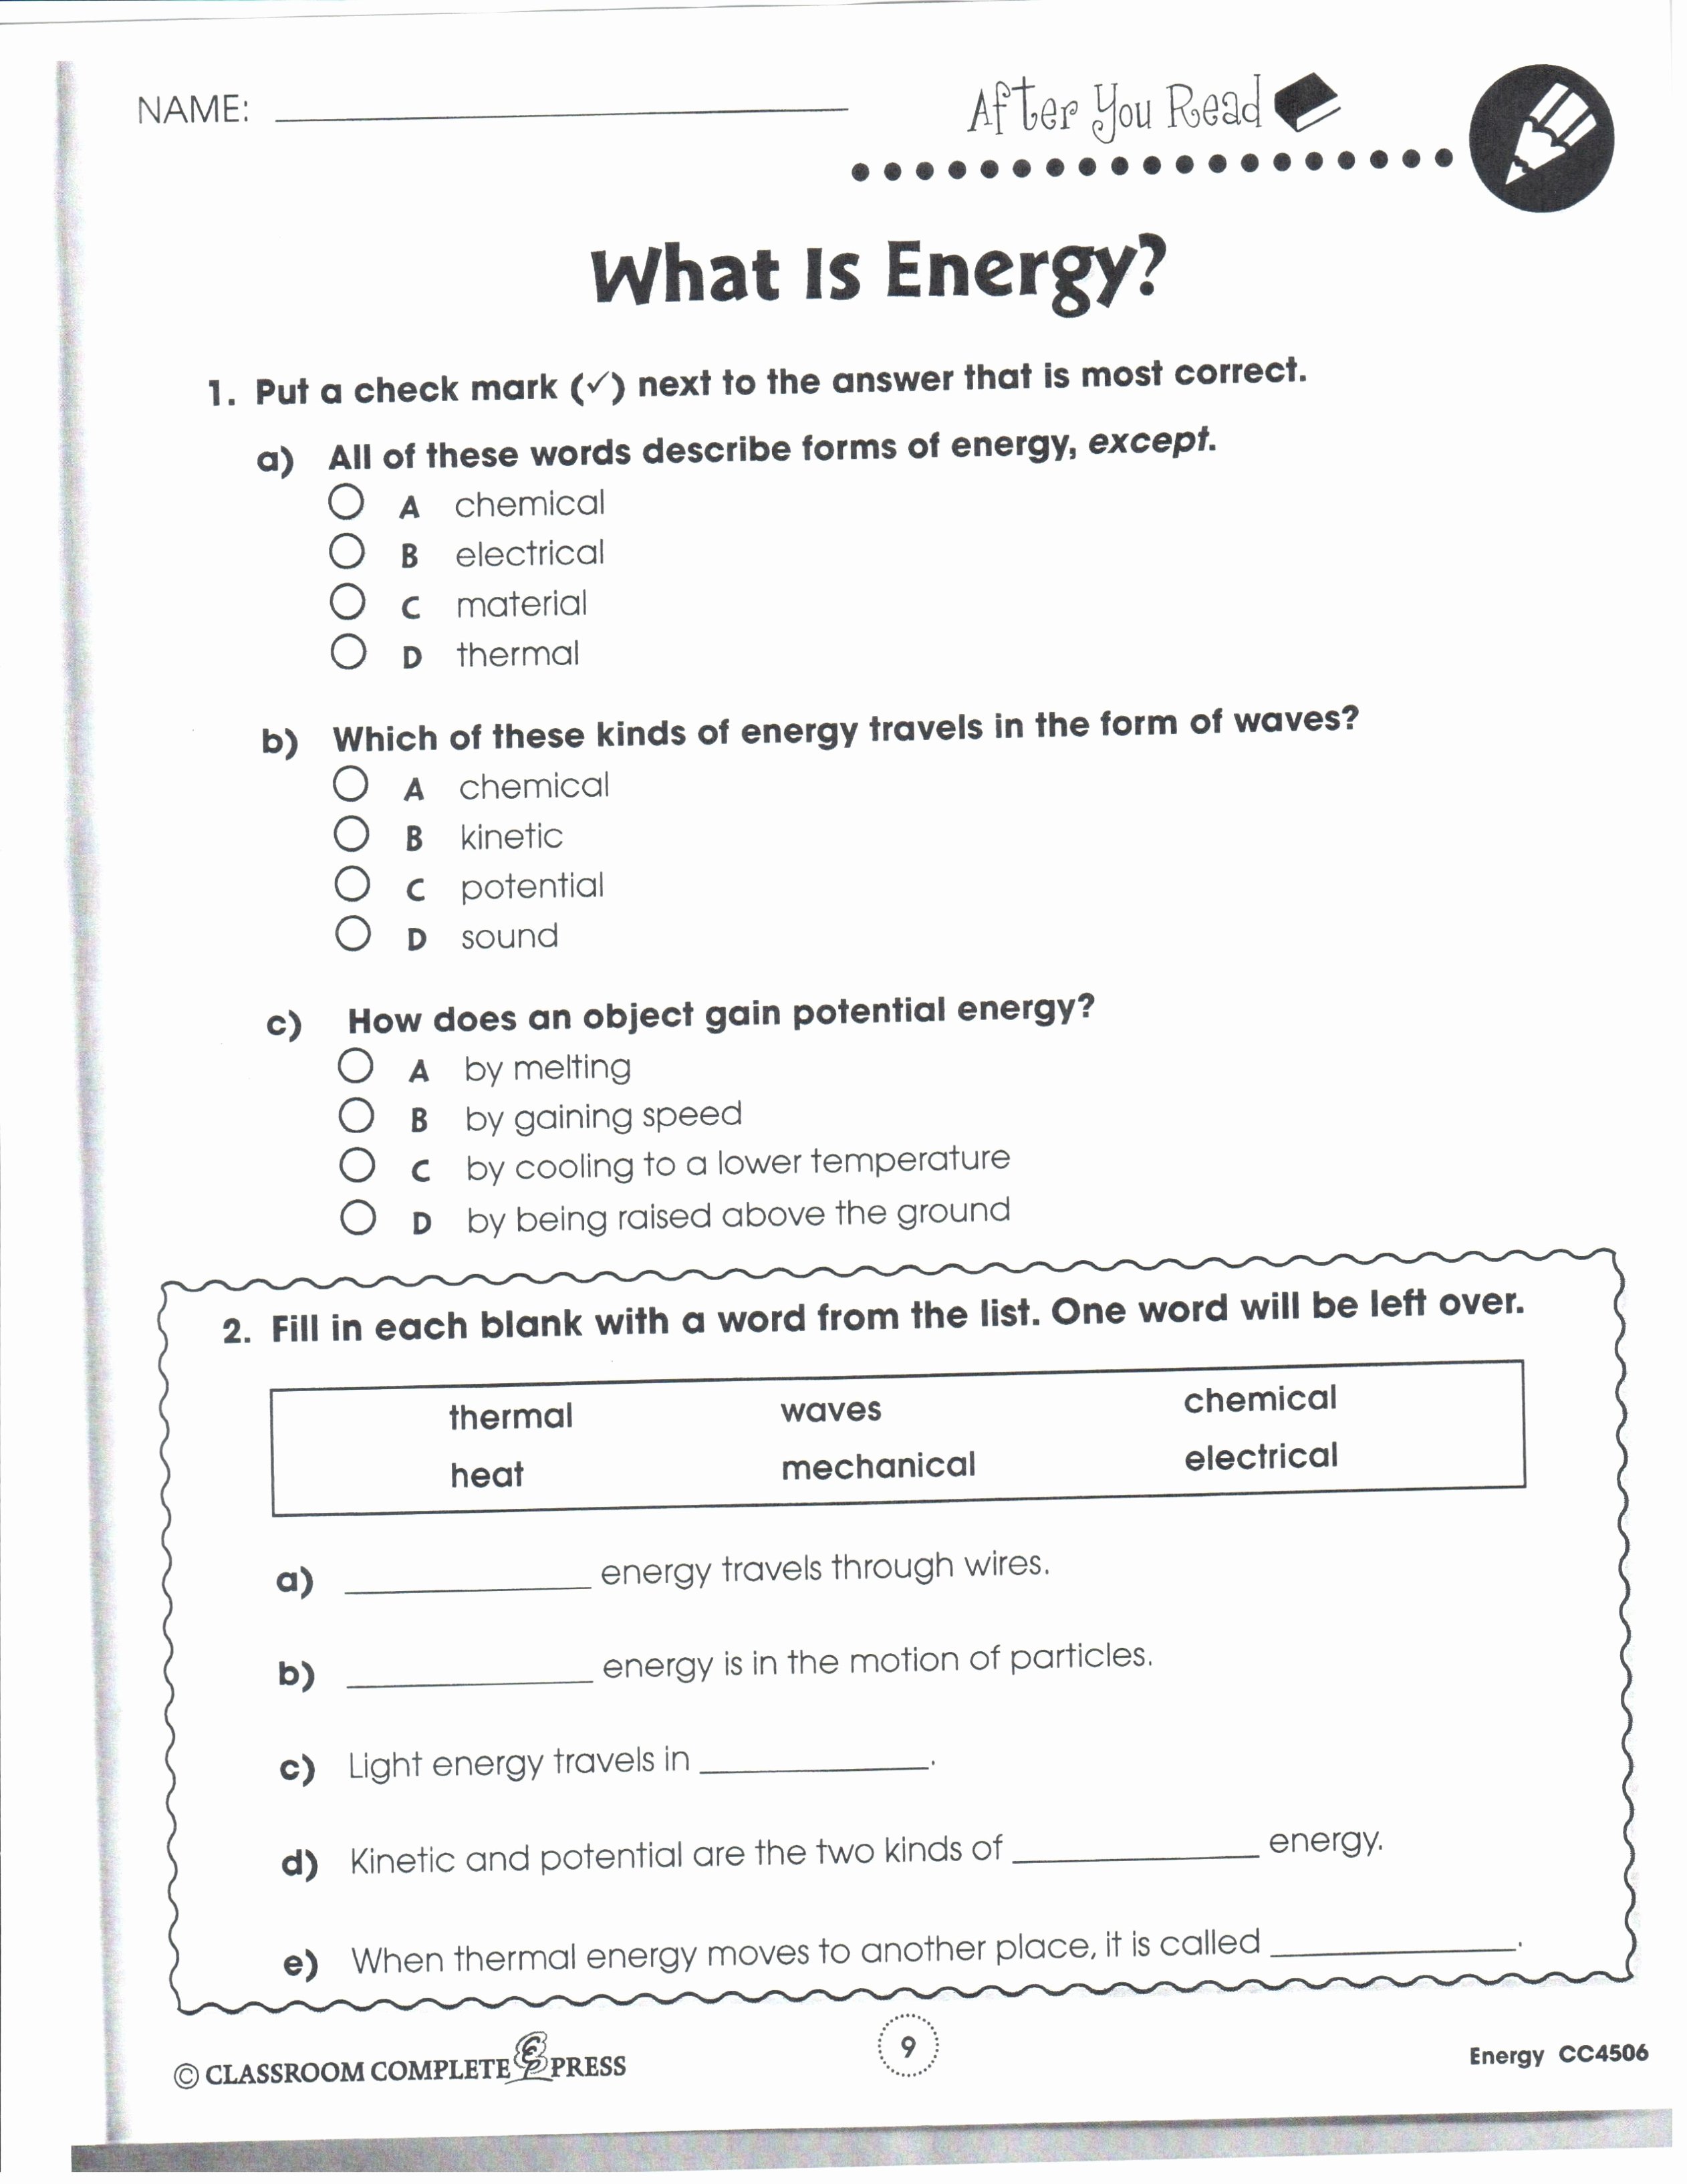 Ionic and Covalent Bonding Worksheet Awesome Covalent Bonding Diagram — Untpikapps